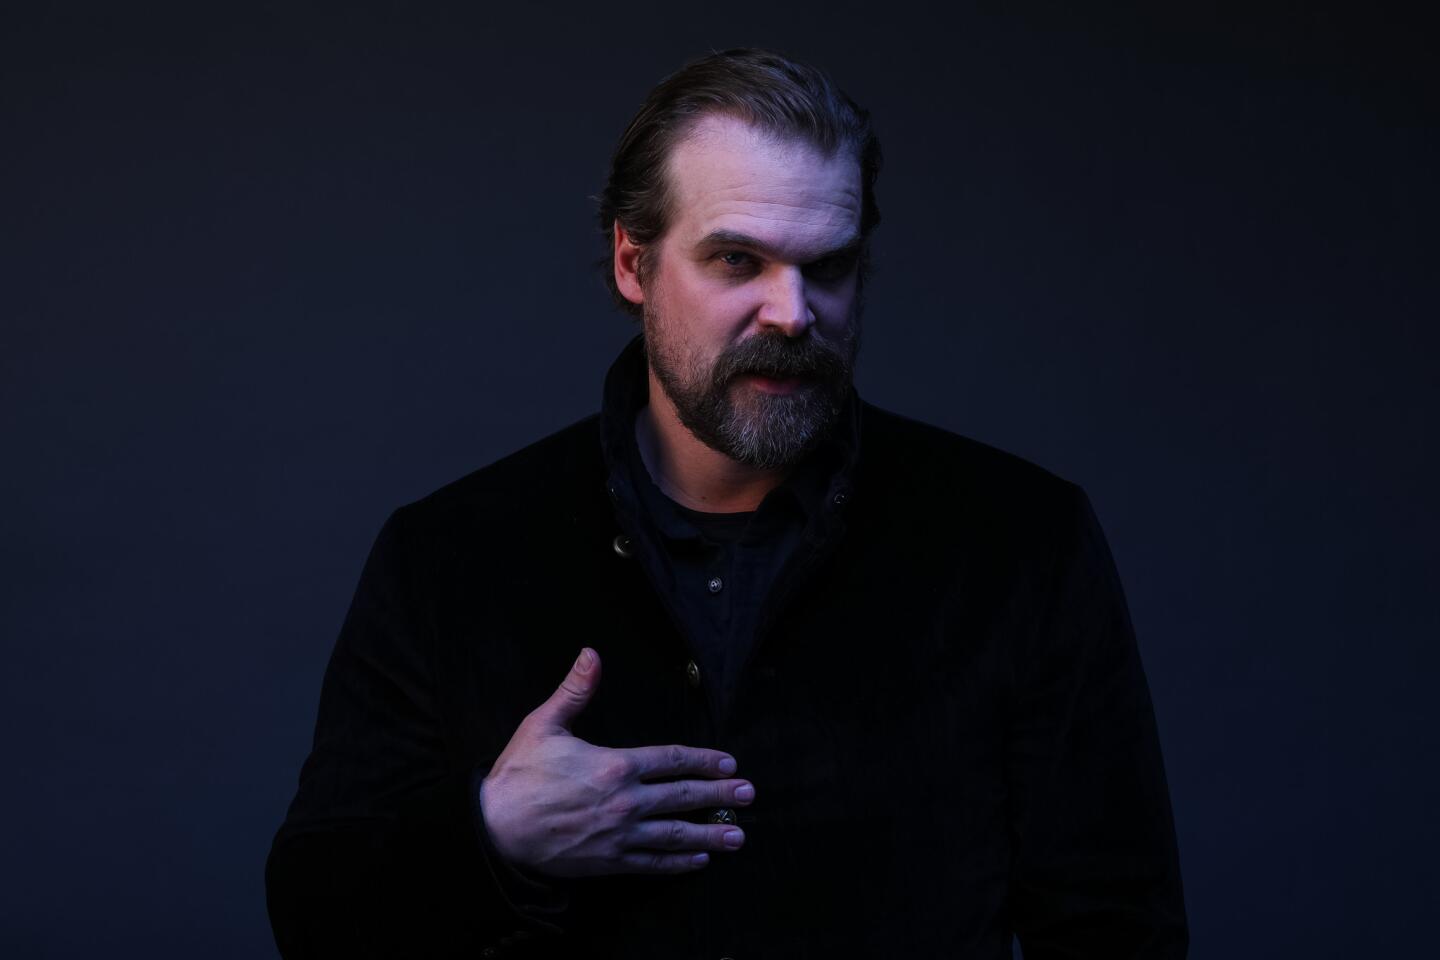 David Harbour, from the Netflix show "Stranger Things," photographed during PaleyFest, at the Dolby Theatre in Hollywood on March 25, 2018.